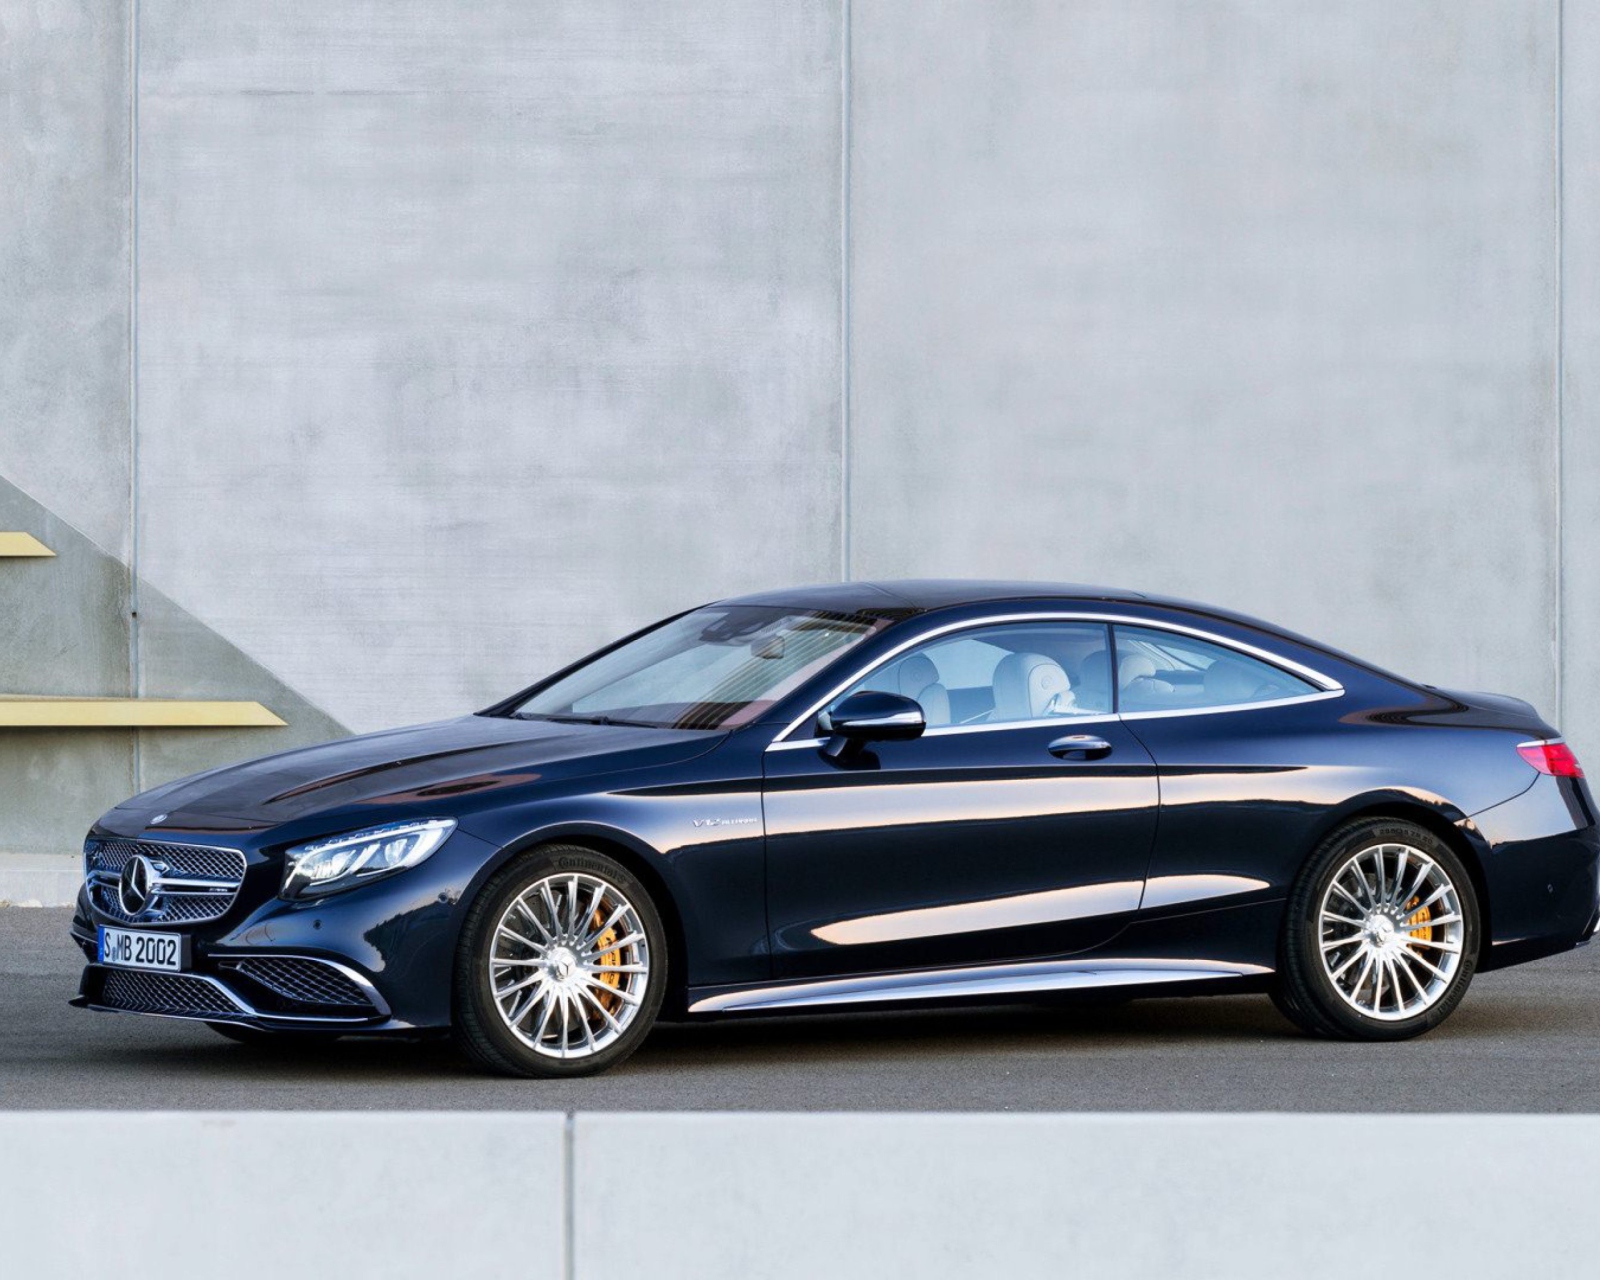 Mercedes-Benz S65 AMG Coupe wallpaper 1600x1280